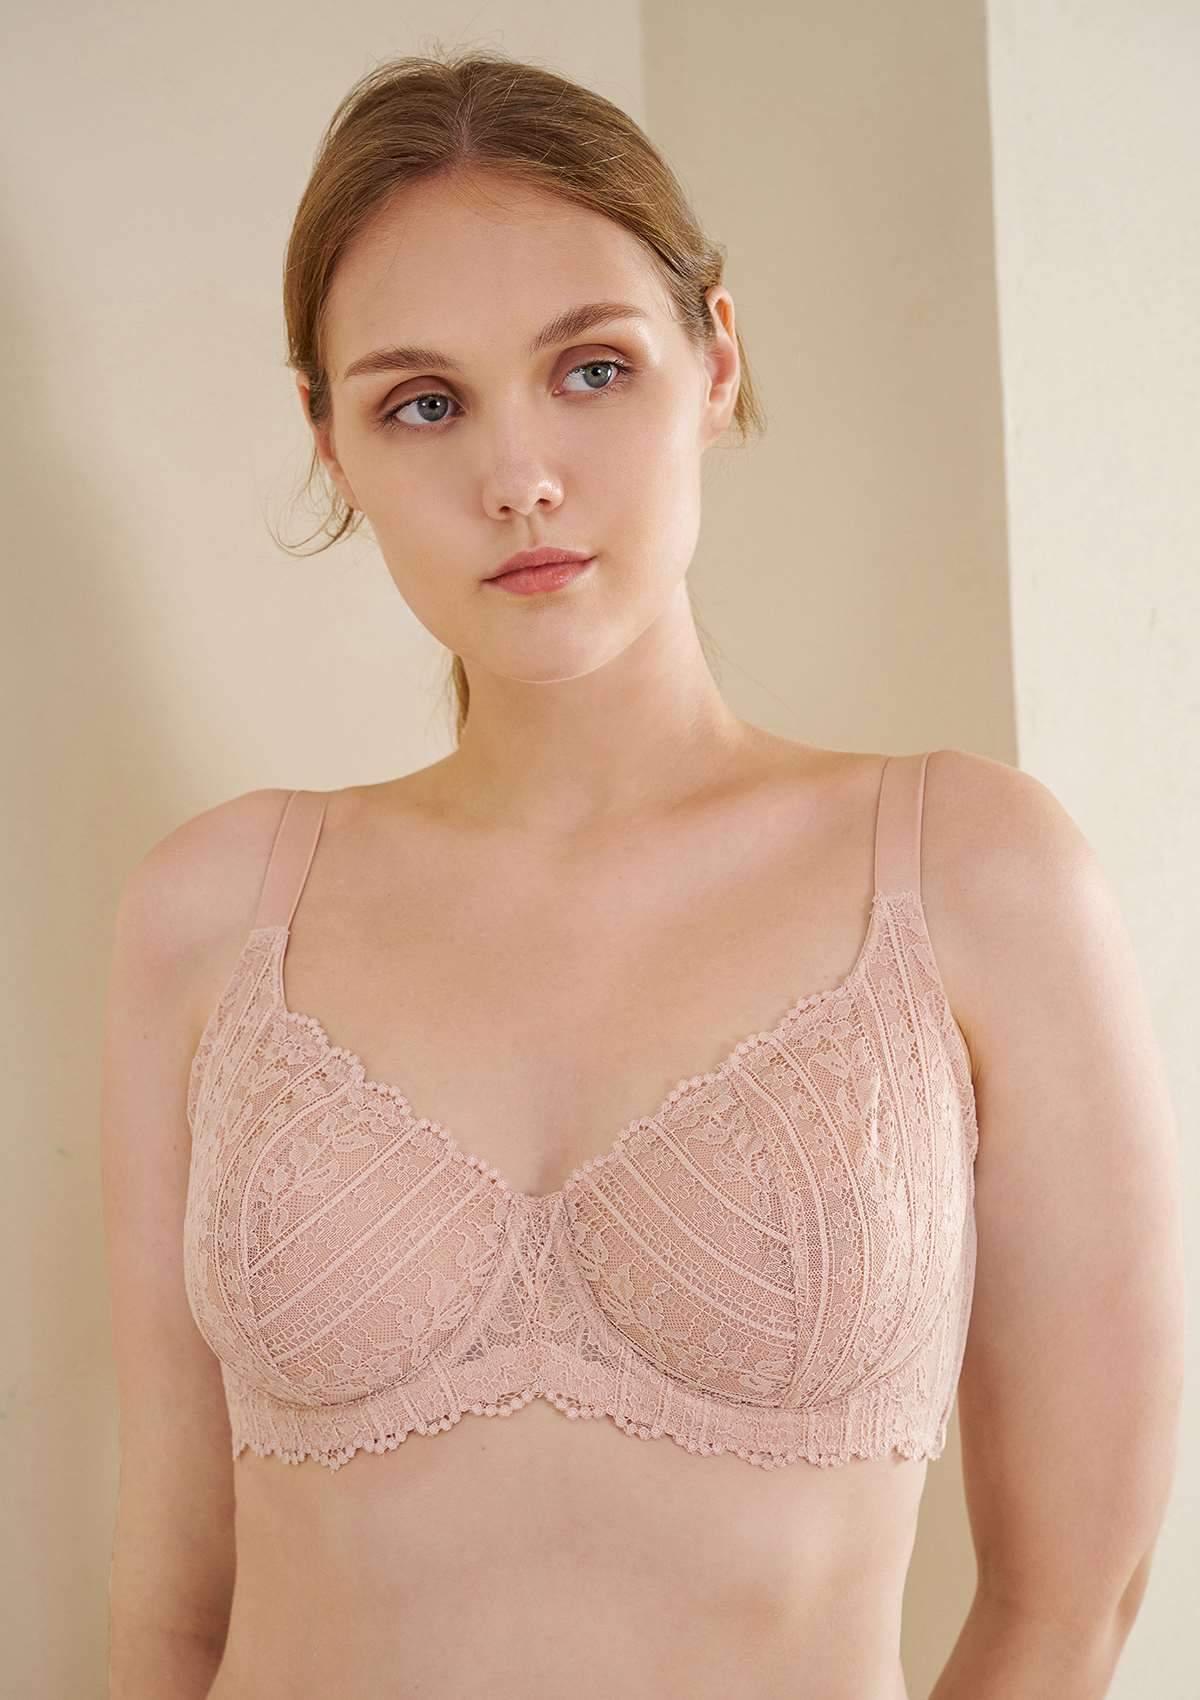 HSIA Vertical Lace Up Bra: Plus Size Back Smoothing Bra - Light Pink / 34 / D